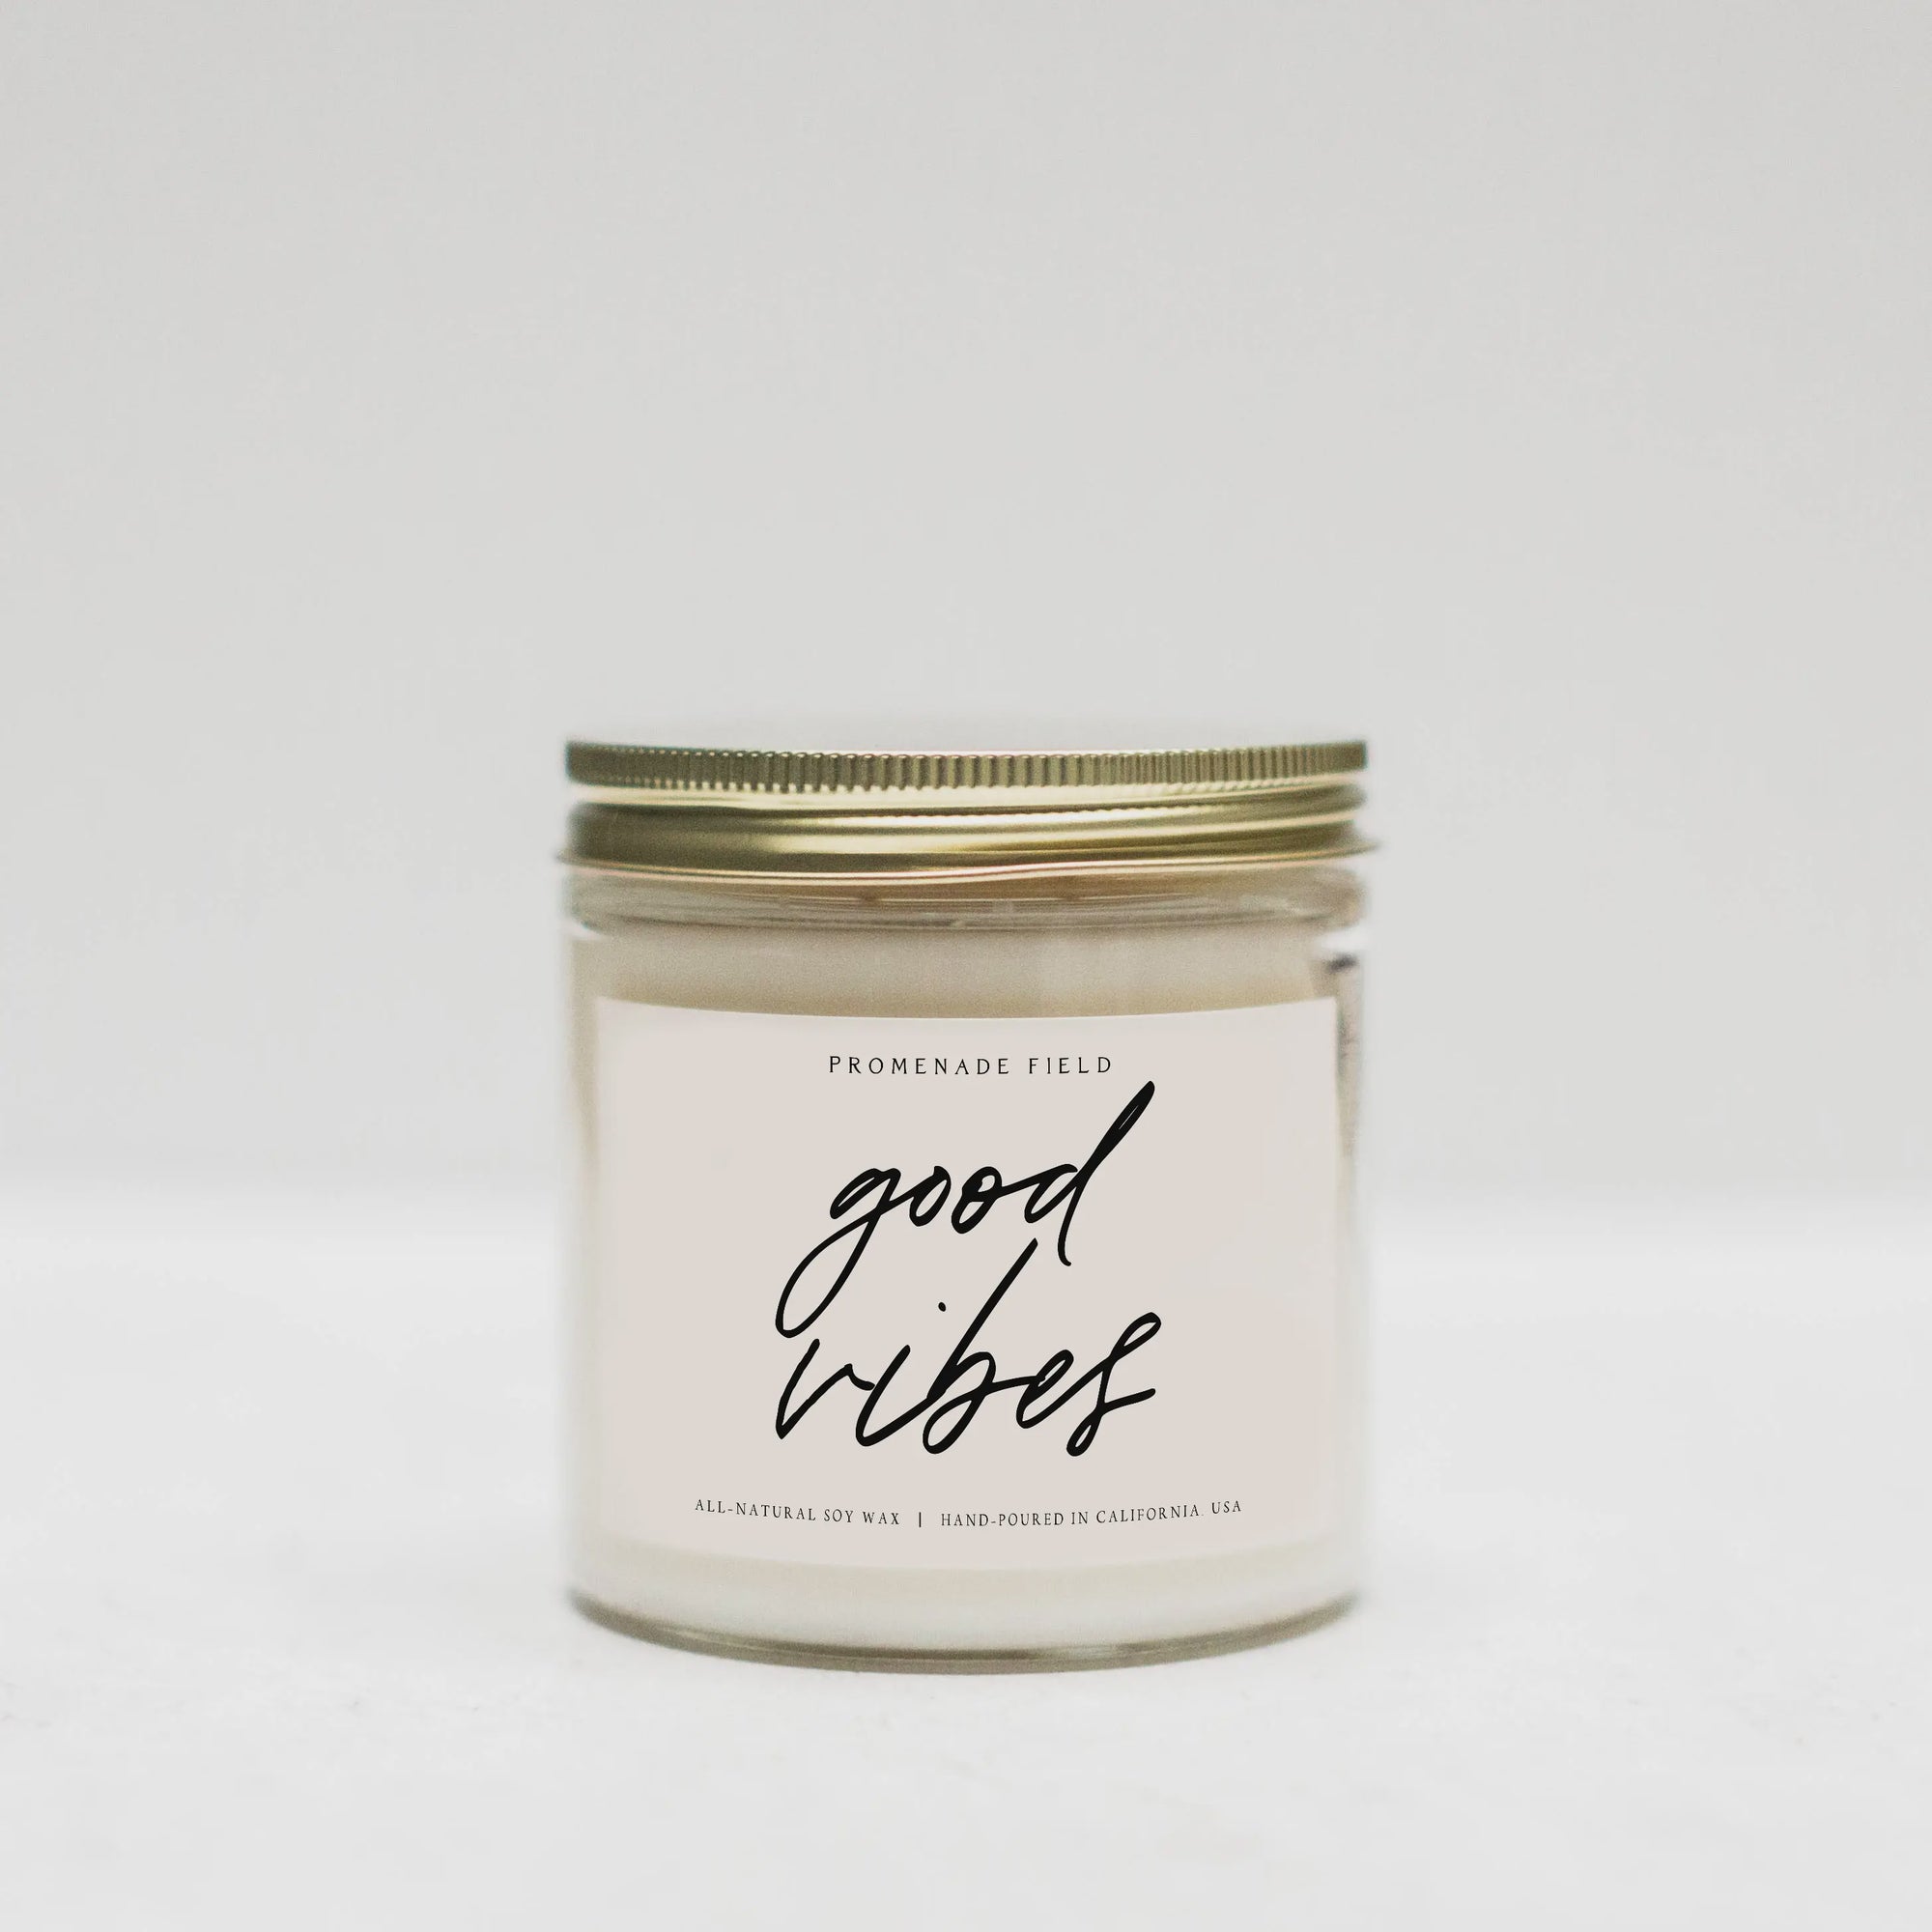 The Good Vibes Soy Candle